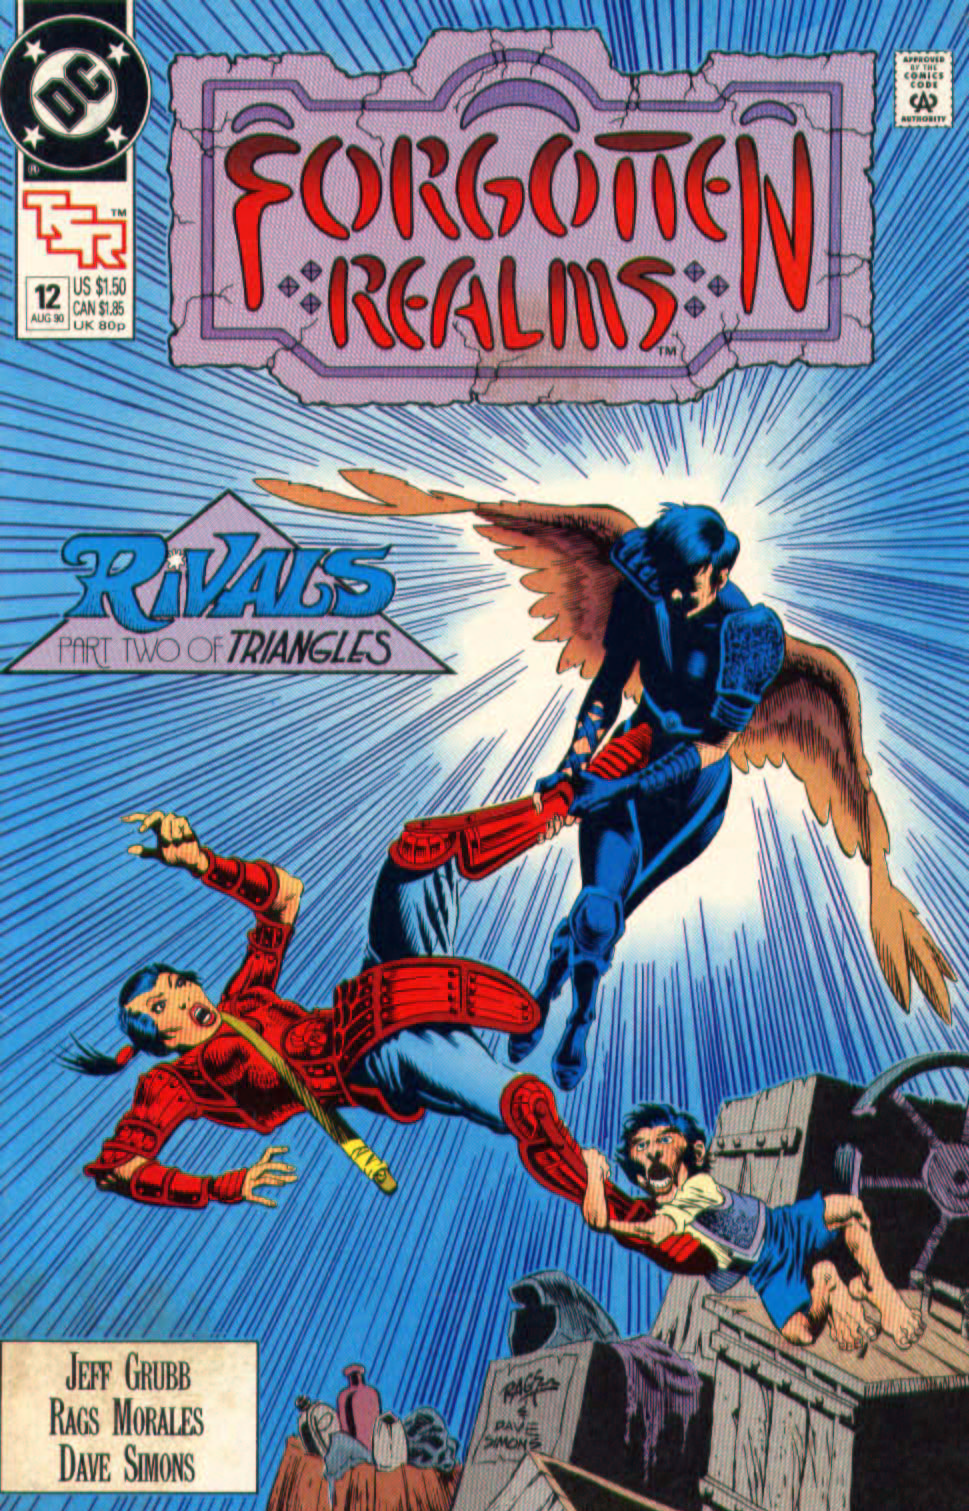 Read online Forgotten Realms comic -  Issue #12 - 1